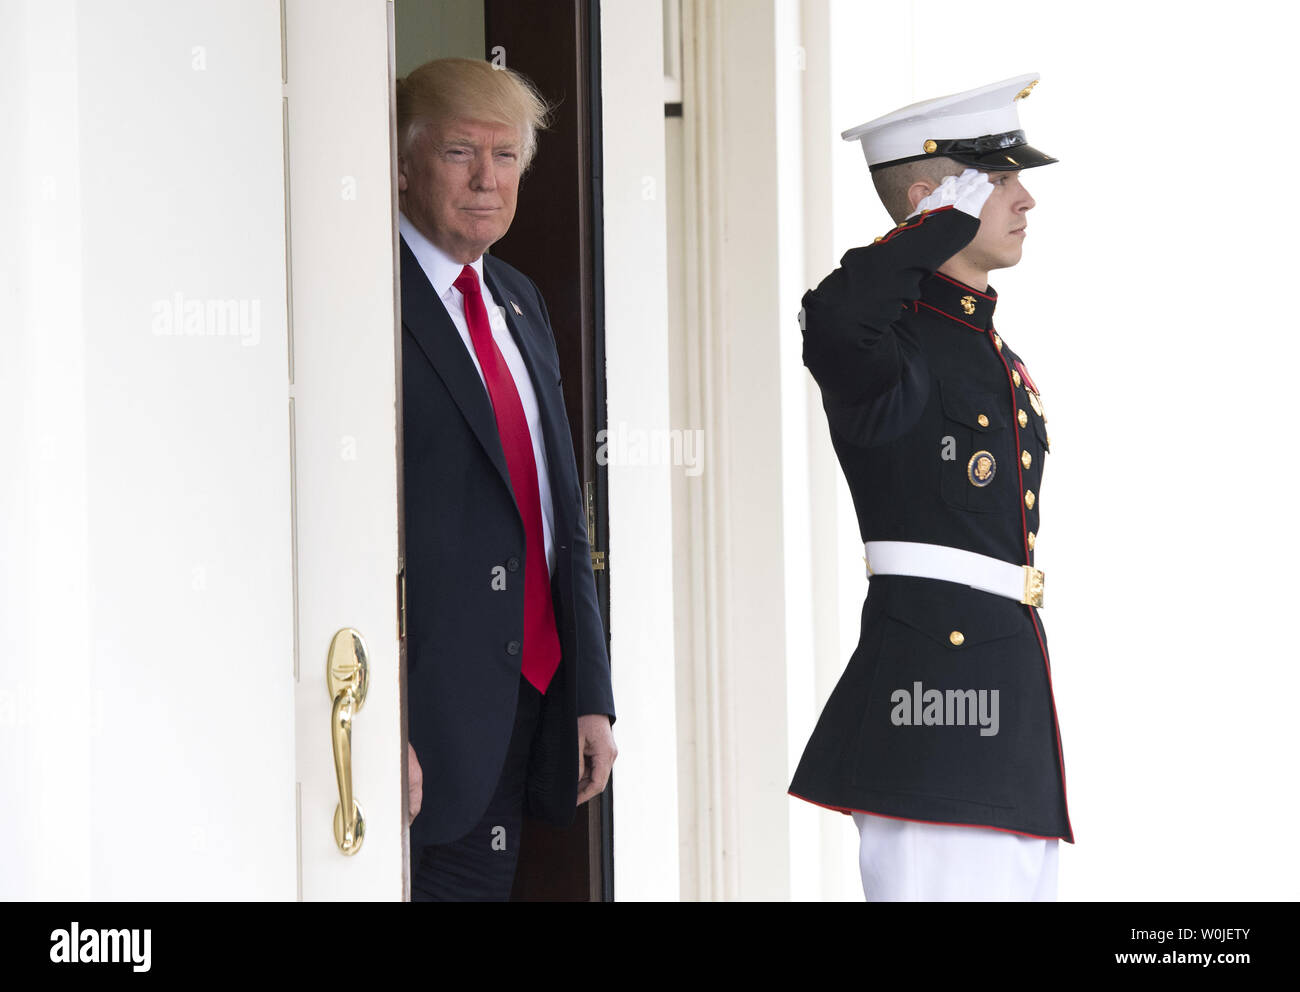 President Donald Trump waits to greet Prime Minister Lars Lokke Rasmussen of Denmark to the White House in Washington, D.C. on March 30, 2017. Photo by Kevin Dietsch/UPI Stock Photo